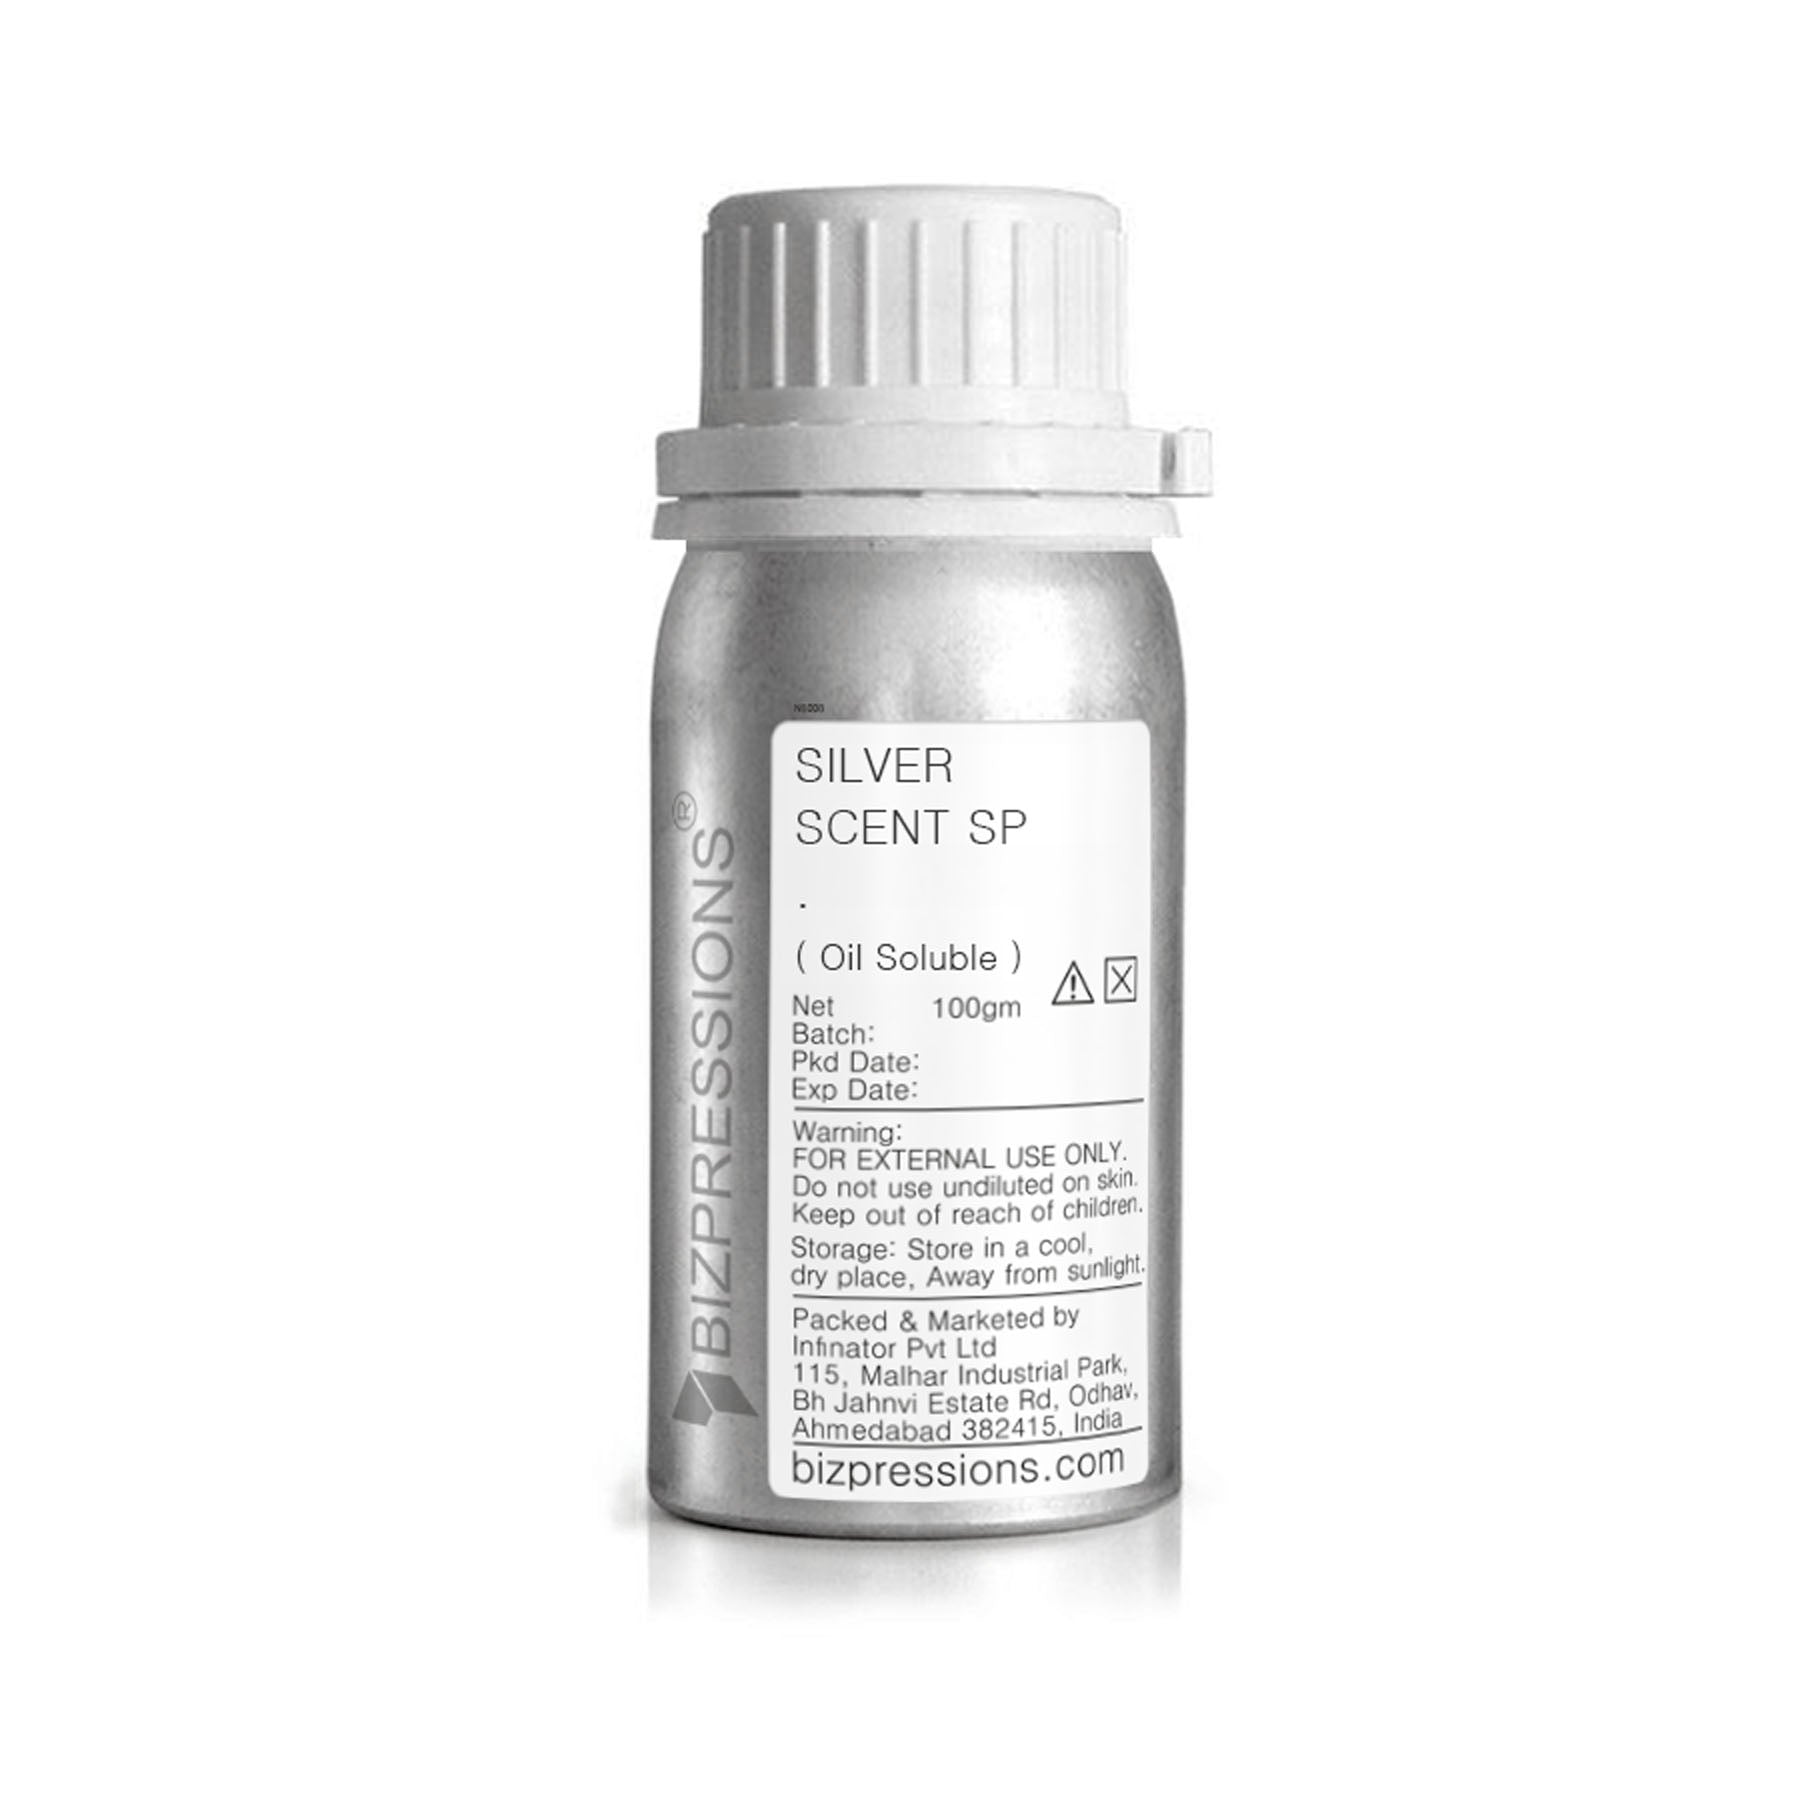 SILVER SCENT SP - Fragrance ( Oil Soluble )